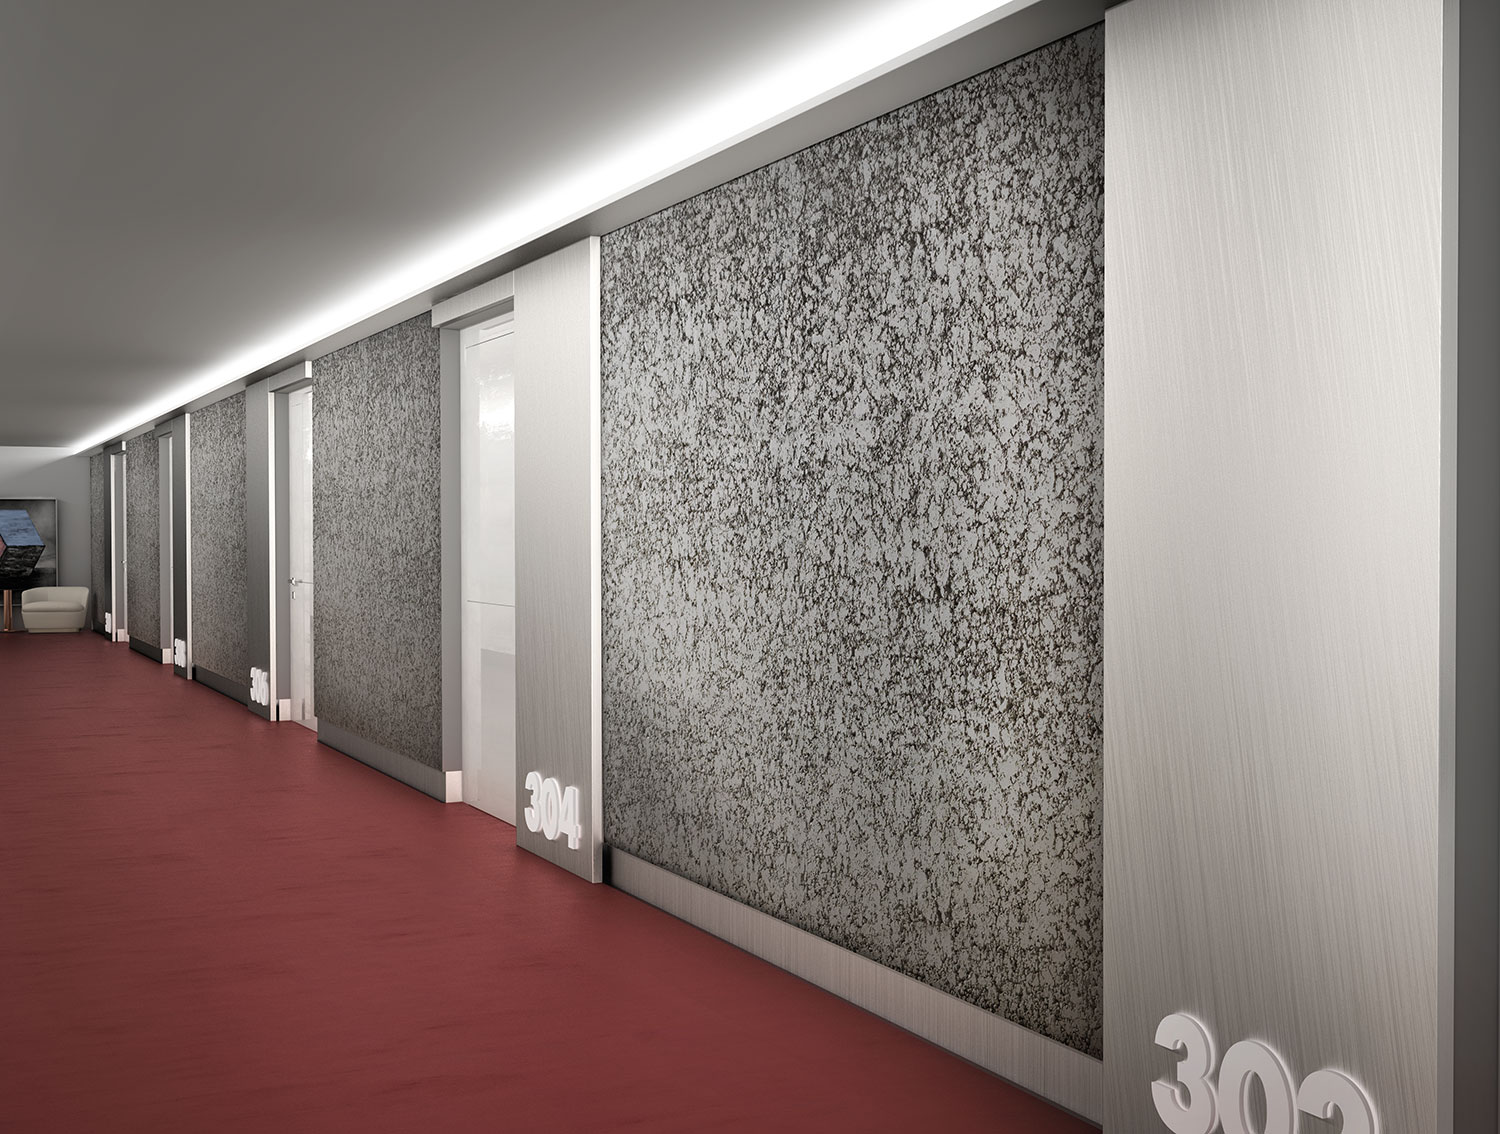 hotel hallway with light up numbers on the doors, grey and black textured walls